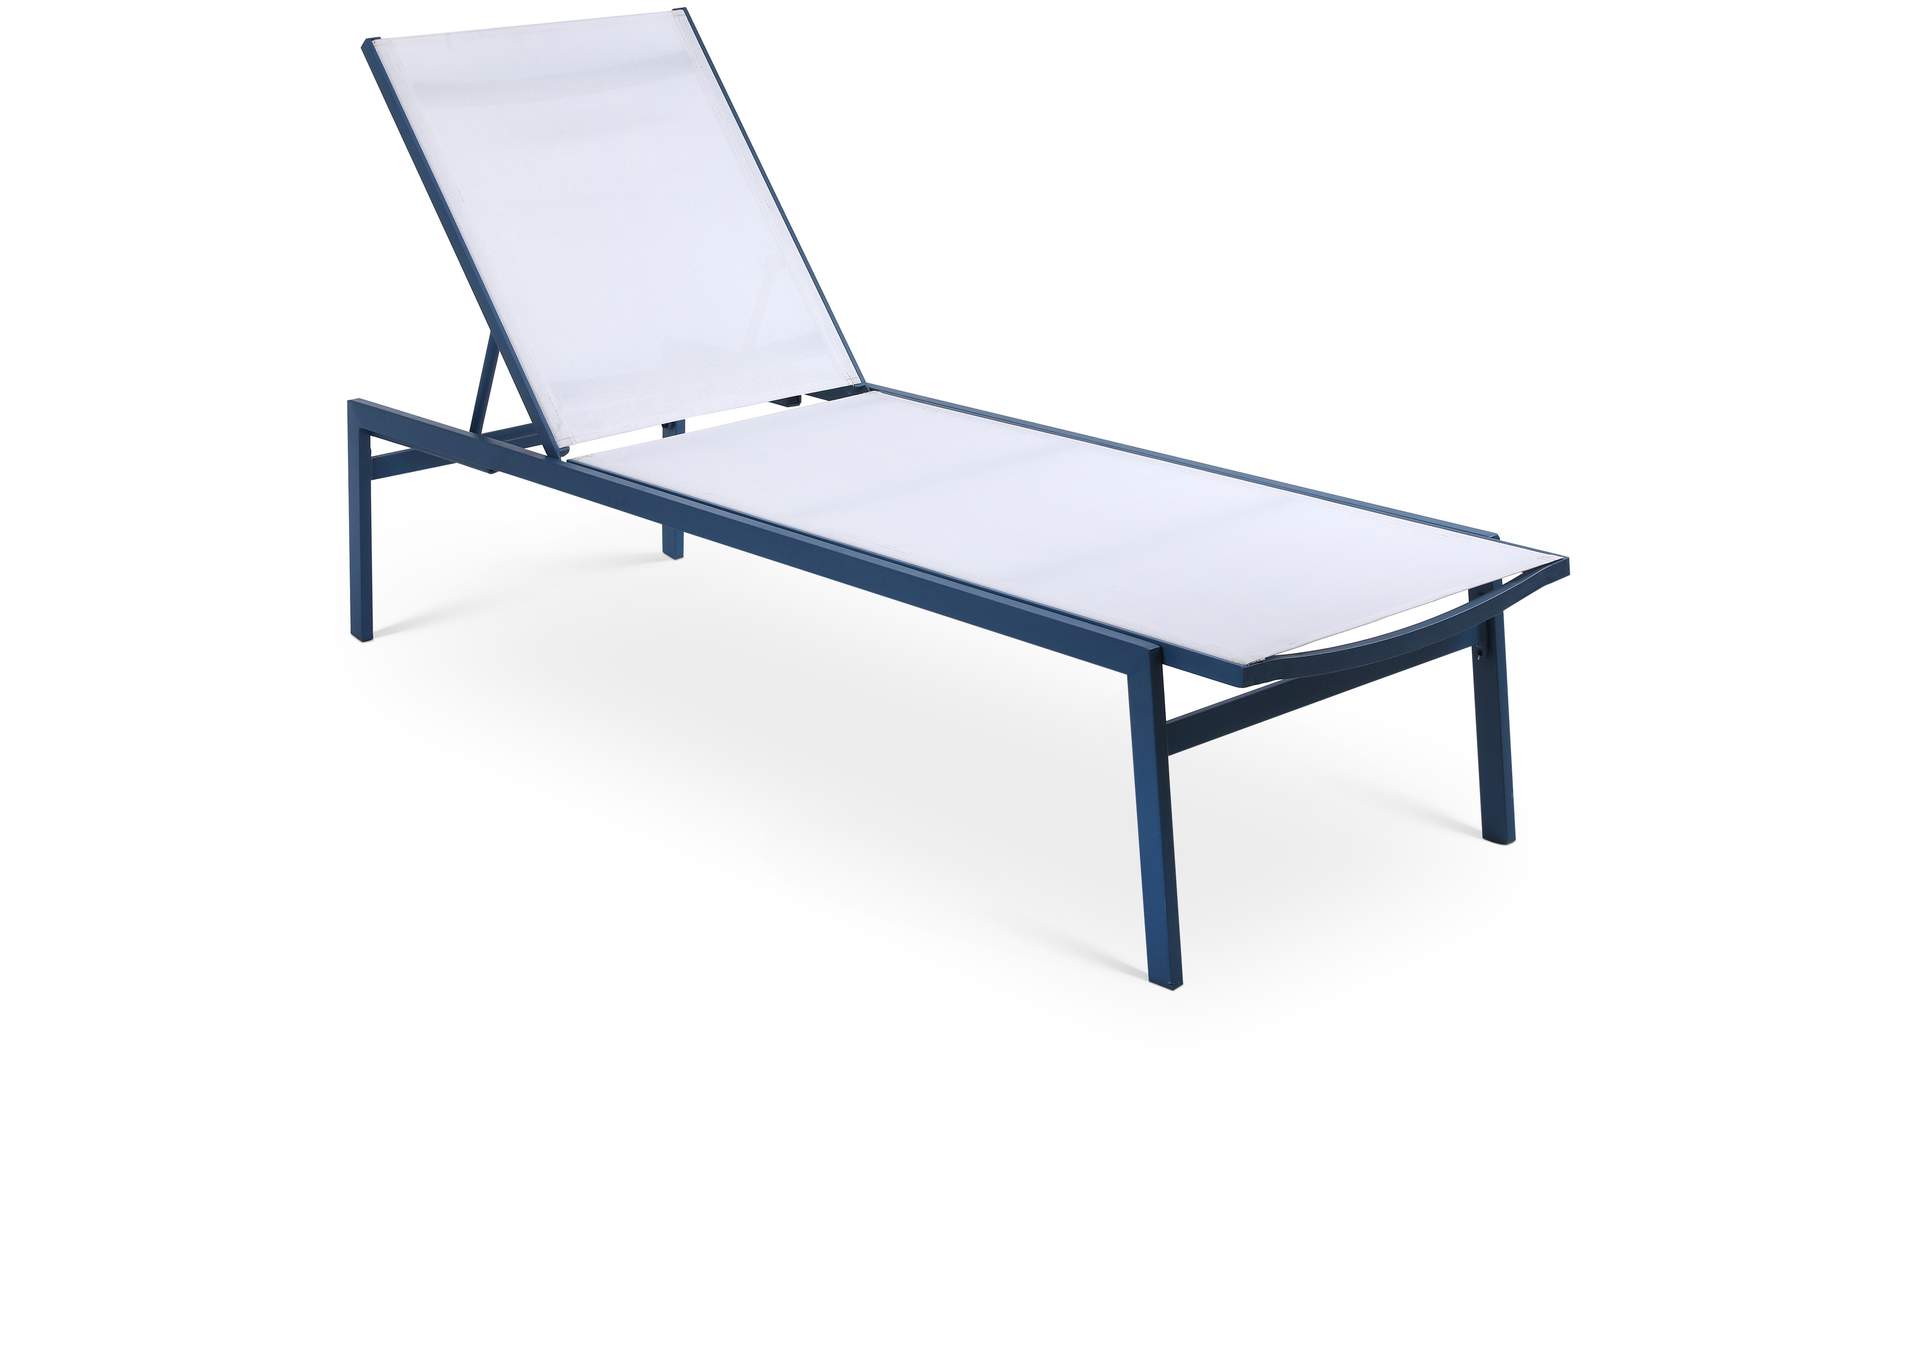 Santorini White Resilient Mesh Water Resistant Fabric Outdoor Patio Aluminum Mesh Chaise Lounge Chair,Meridian Furniture